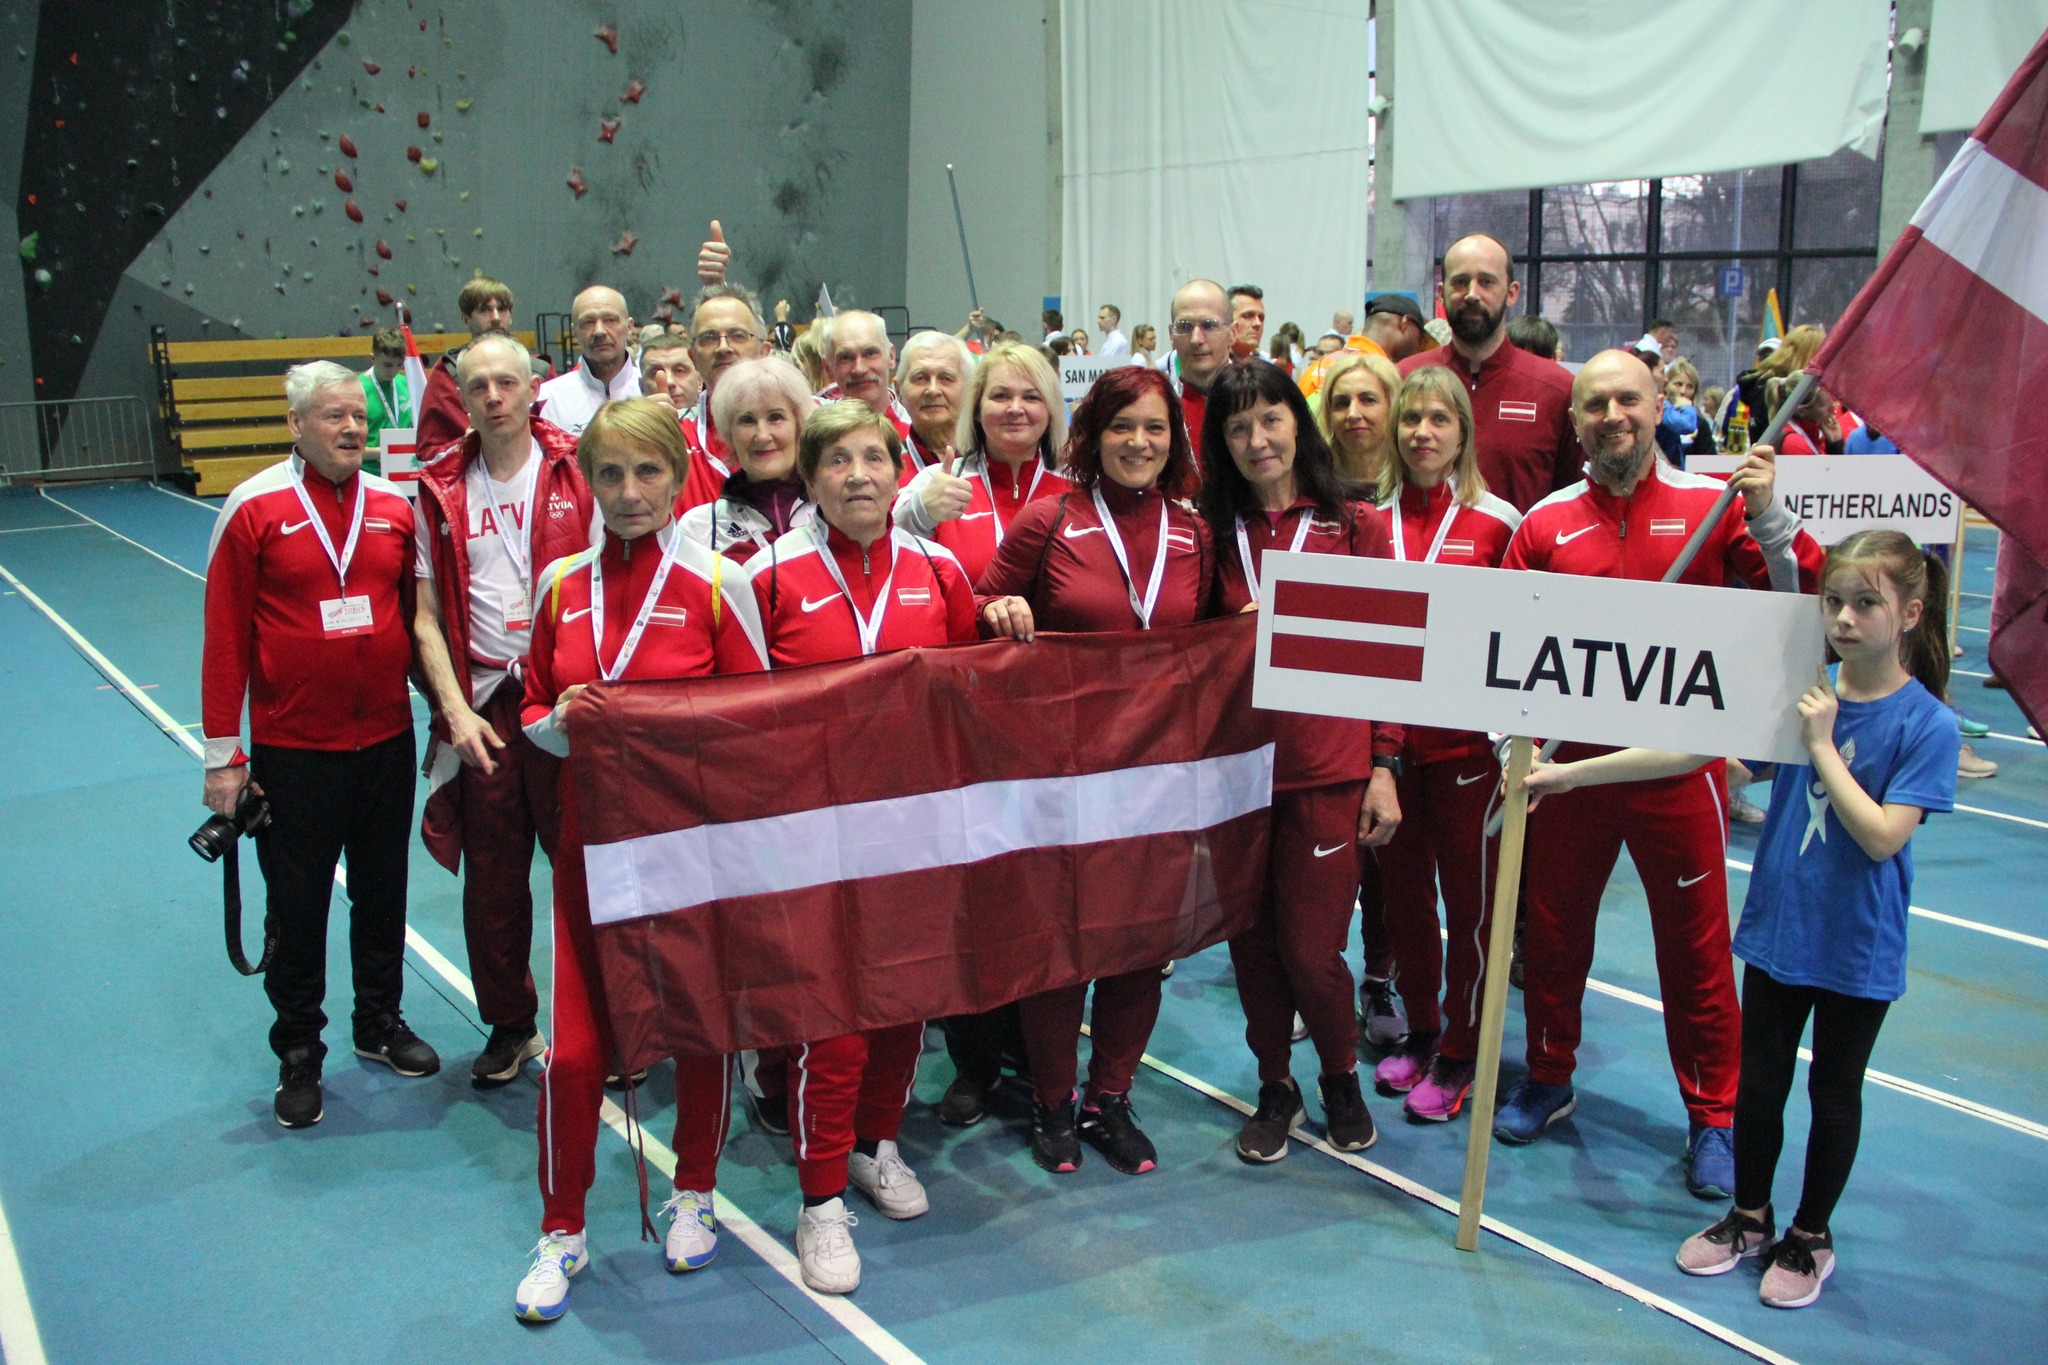 Team Latvia ready for Opening Ceremony. Photo by Sandy Triolo.